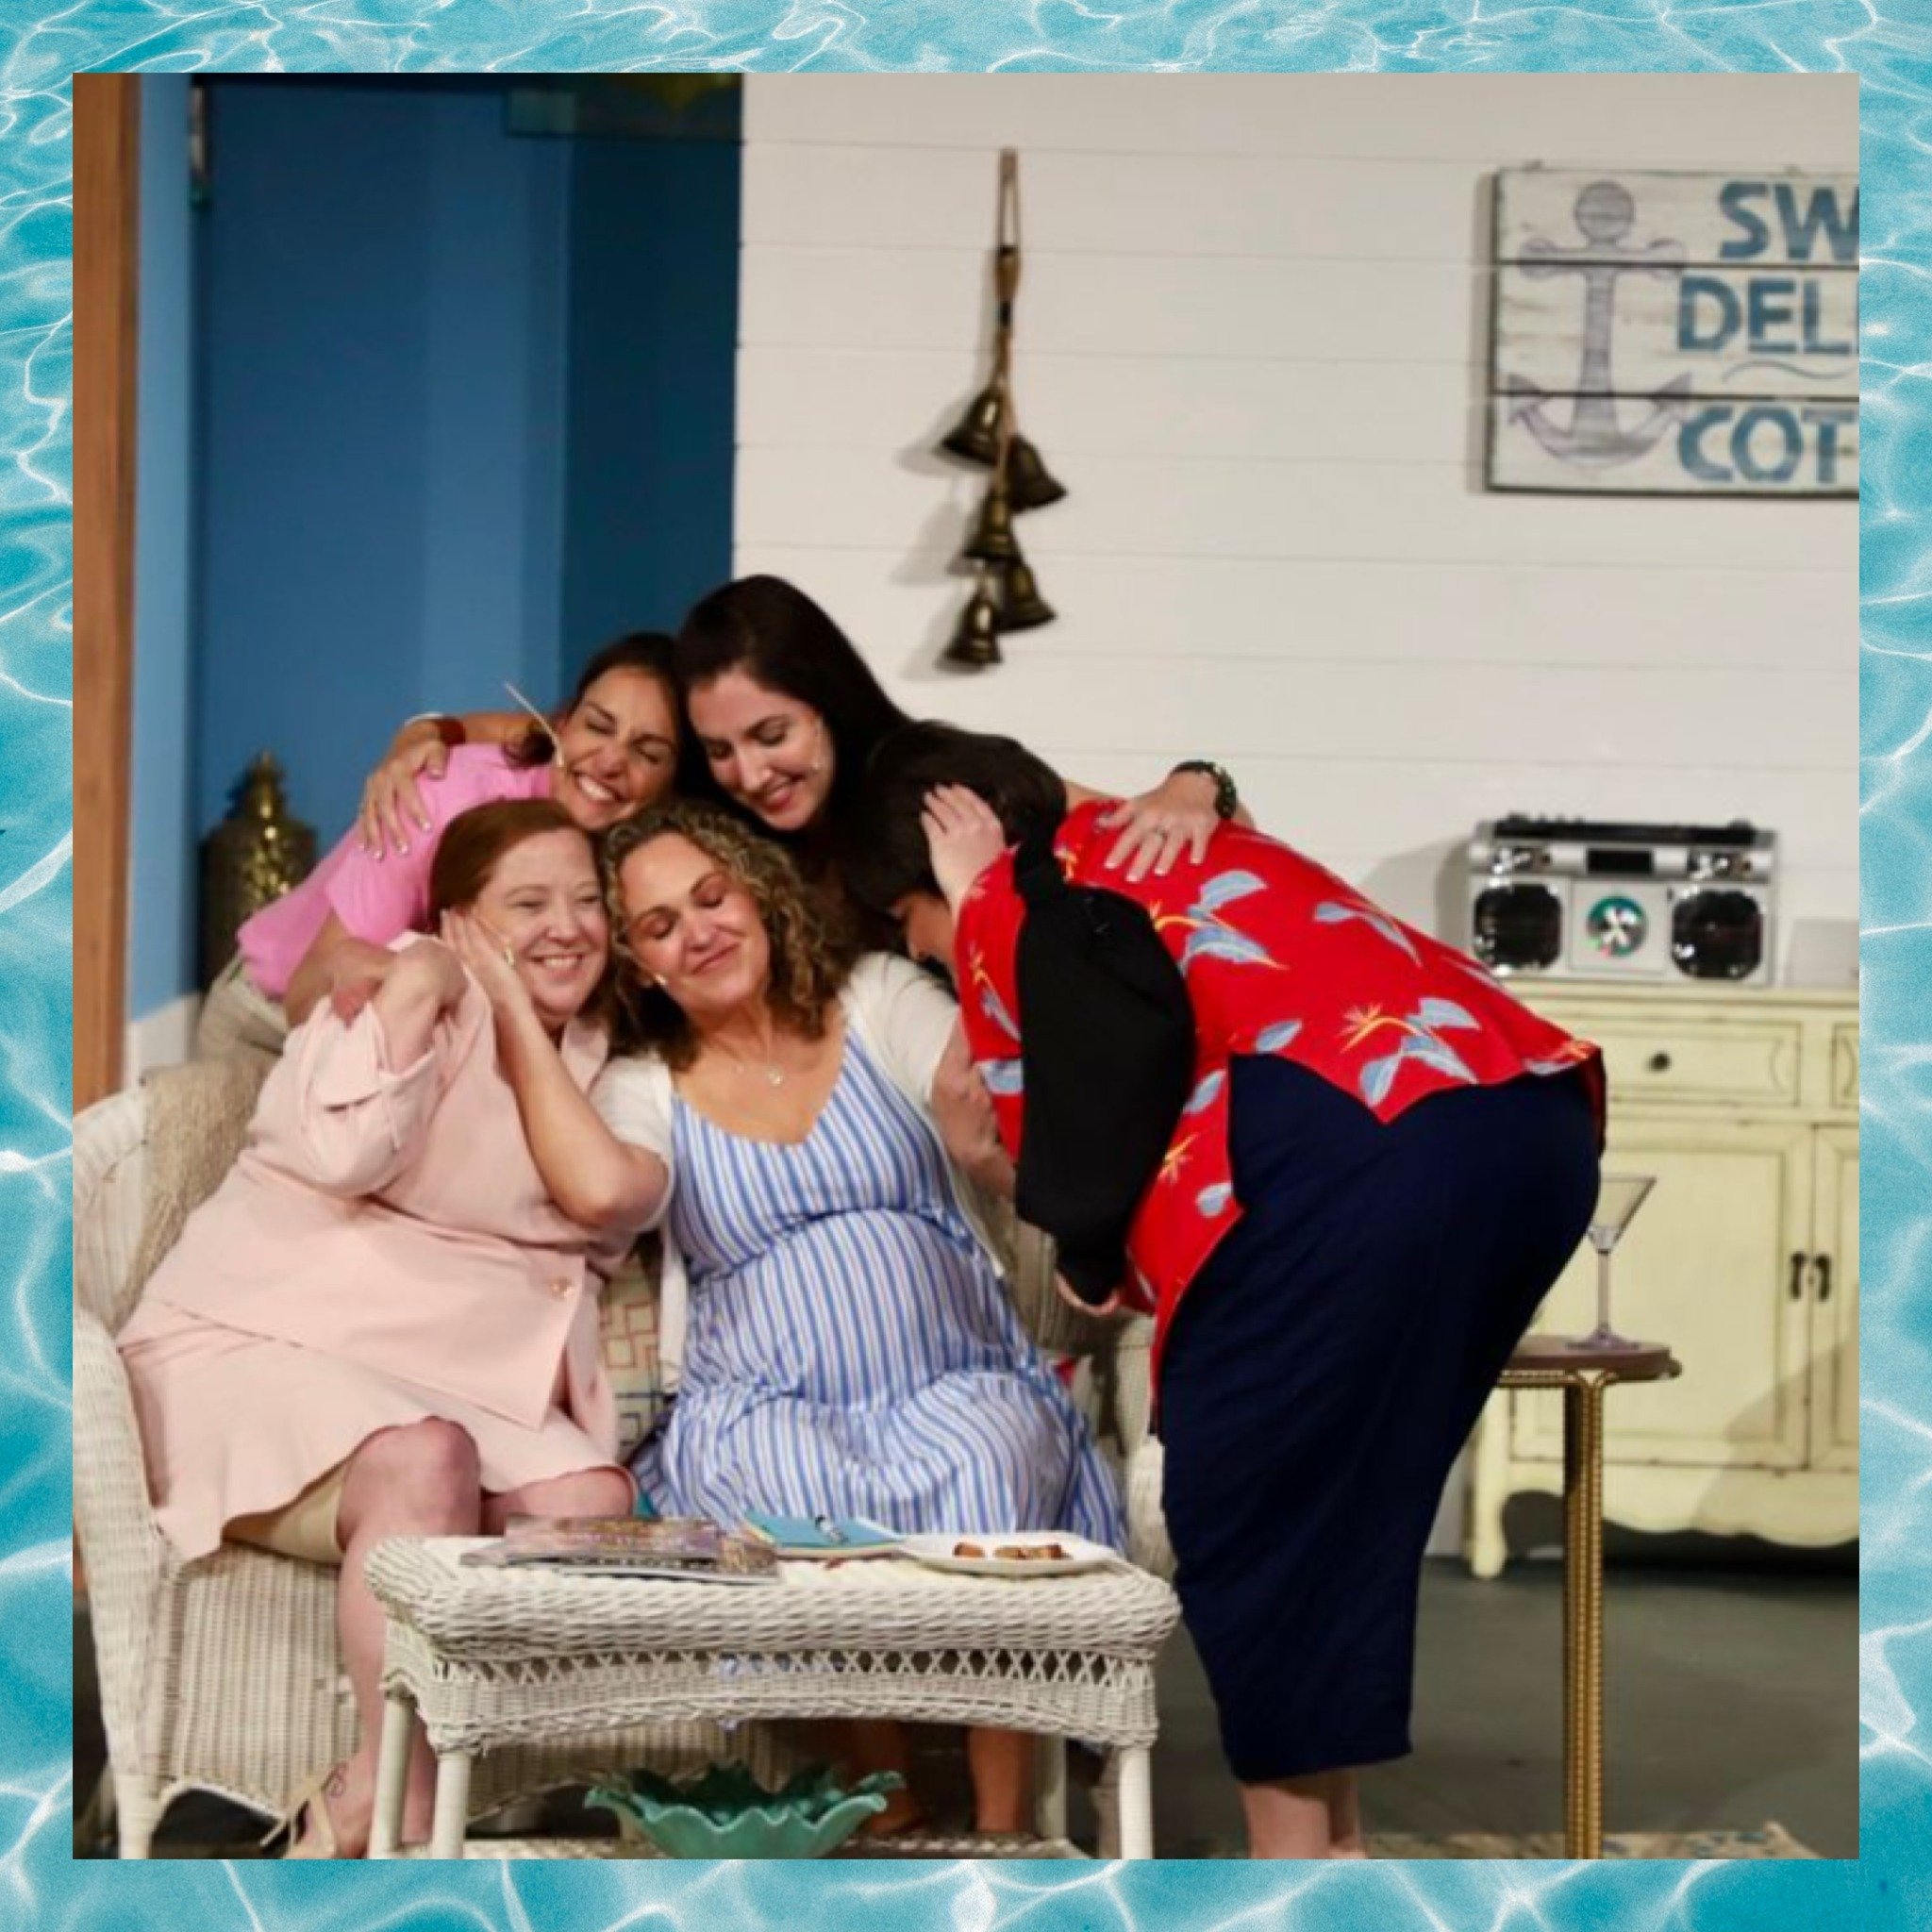 ONLY HANDFUL OF SEATS REMAIN! 🏖🏊🤩
Sunday is sold out!! So grab your tickets and your best friends and come see #TheSweetDelilahSwimClub! We only have three performances left!
Call 830.997.3588 or visit the link in our bio NOW!